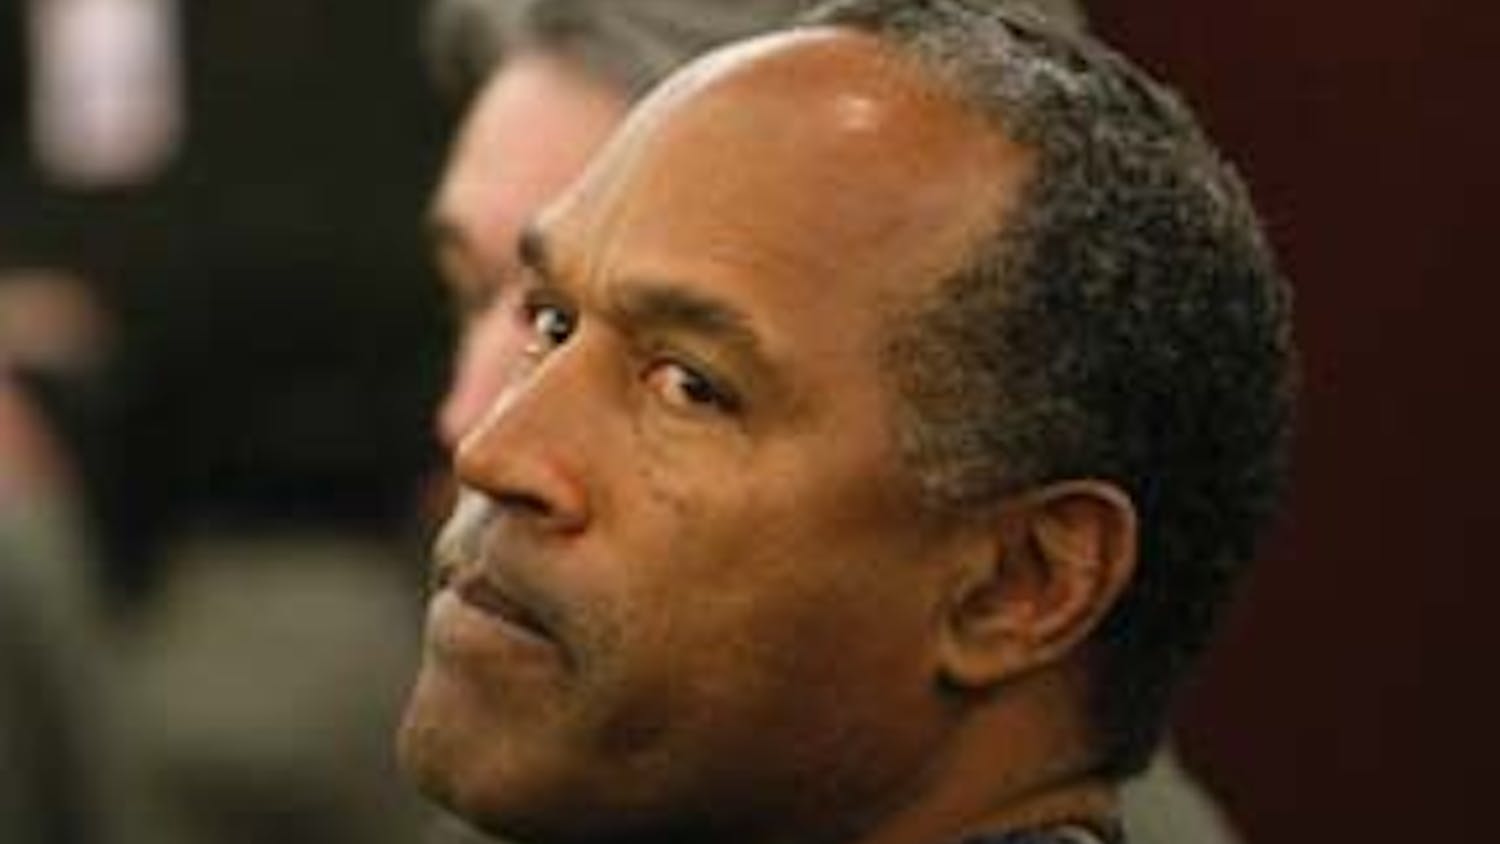 O.J. Simpson sits in a courtroom during his bail revocation hearing in Las Vegas, Wednesday, Jan. 16, 2008. An angry judge doubled O.J. Simpson's bail to $250,000 on Wednesday for violating terms of his original bail by attempting to contact a co-defendant in his armed robbery case. (AP Photo/Rick Wilking, Pool)